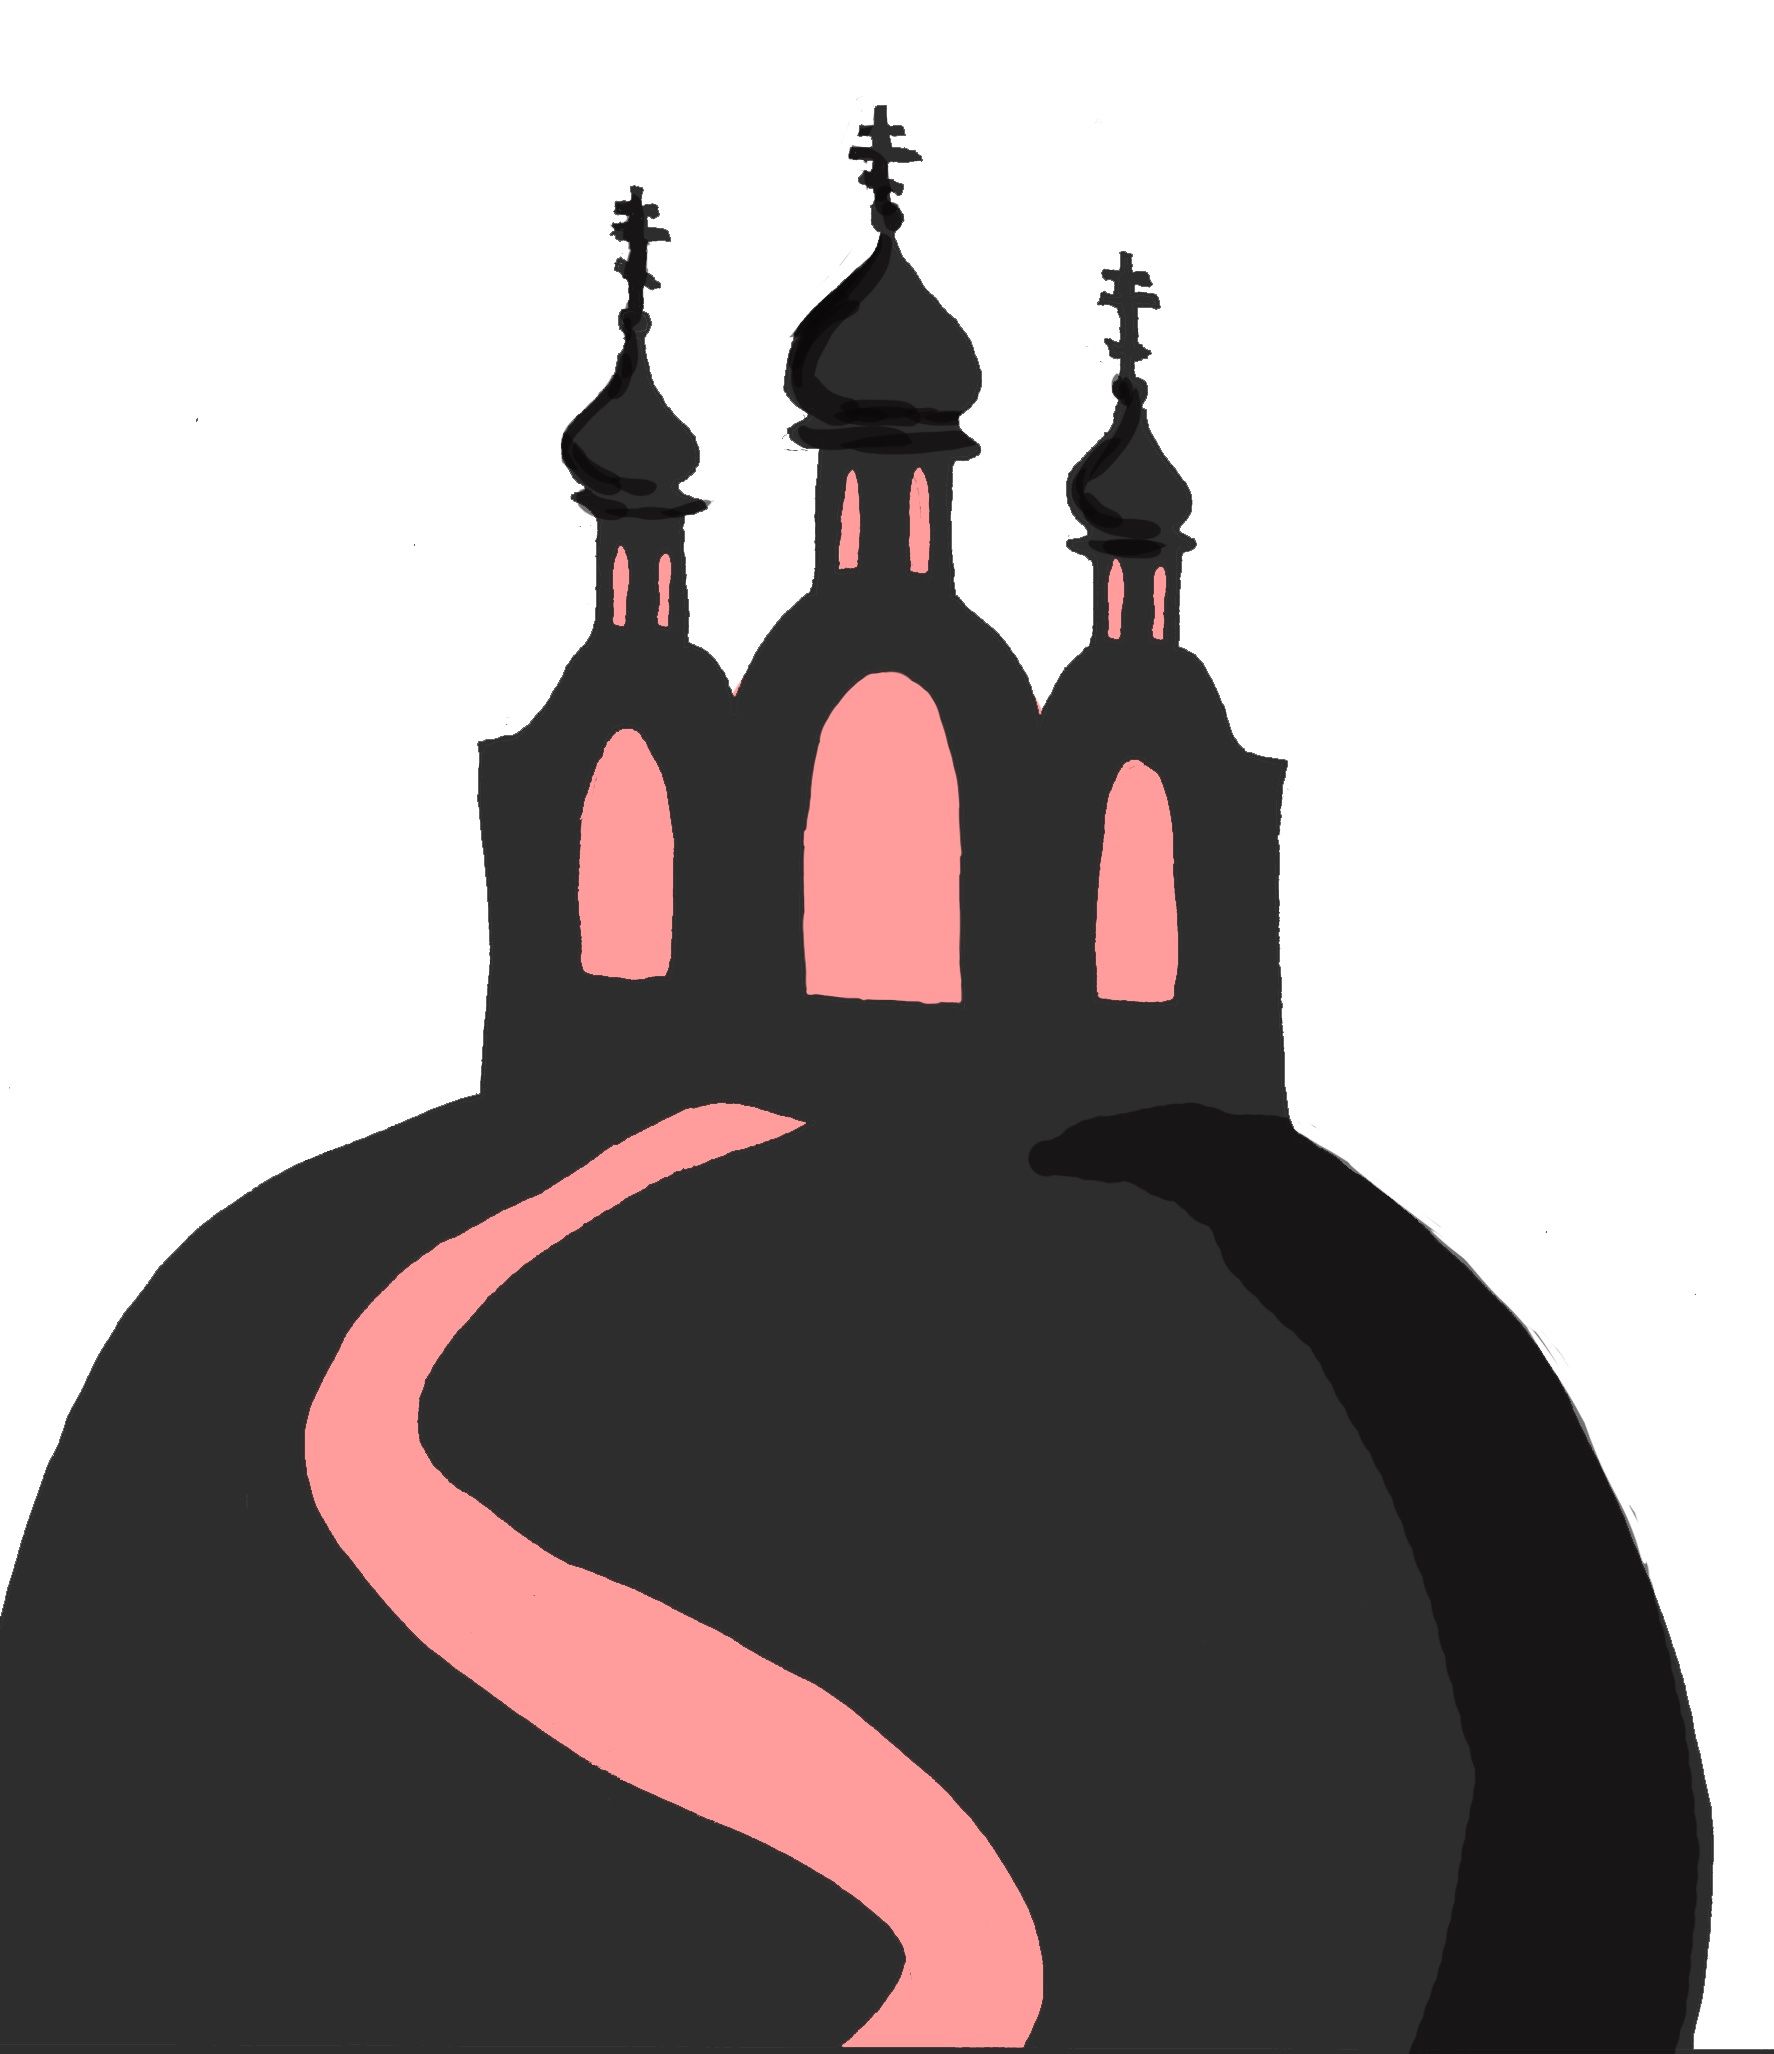 A crude illustration of an Orthodox church on top of a steep hill